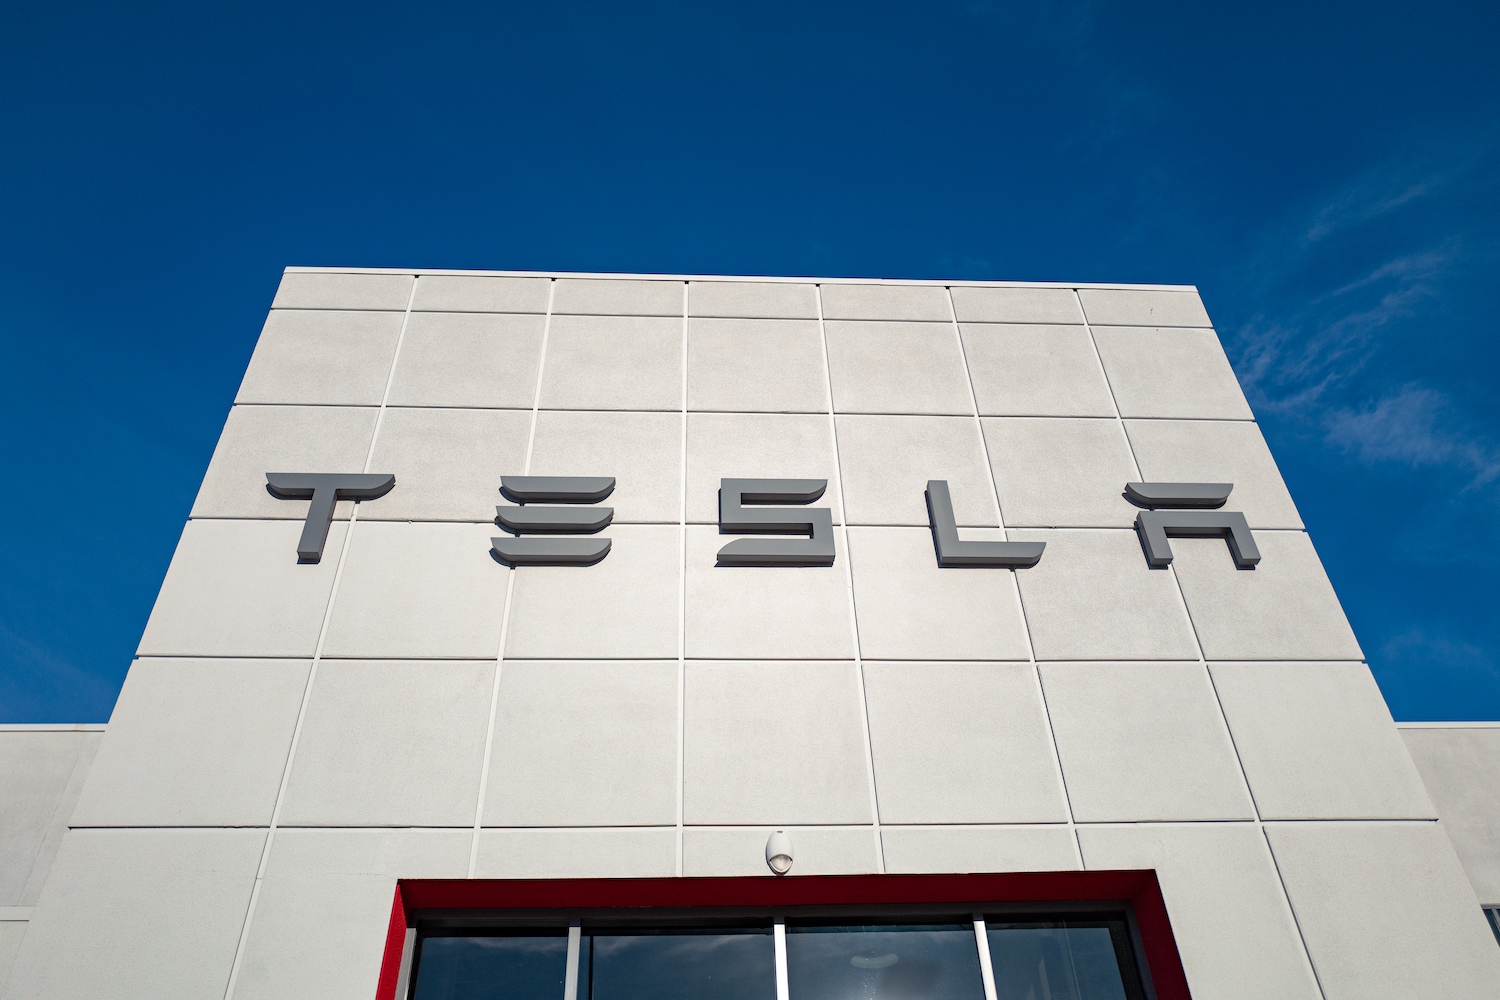 The facade of Tesla Motors dealership in Pleasanton, California. Elon Musk and the Tesla corporation dealt with early Tesla recalls gracefully. Recently, Tesla Refused To Recall Autopilot Cars Crashing Into First Responders, so the NHTSA Government Demands Answers. | Smith Collection/Gado/Getty Images